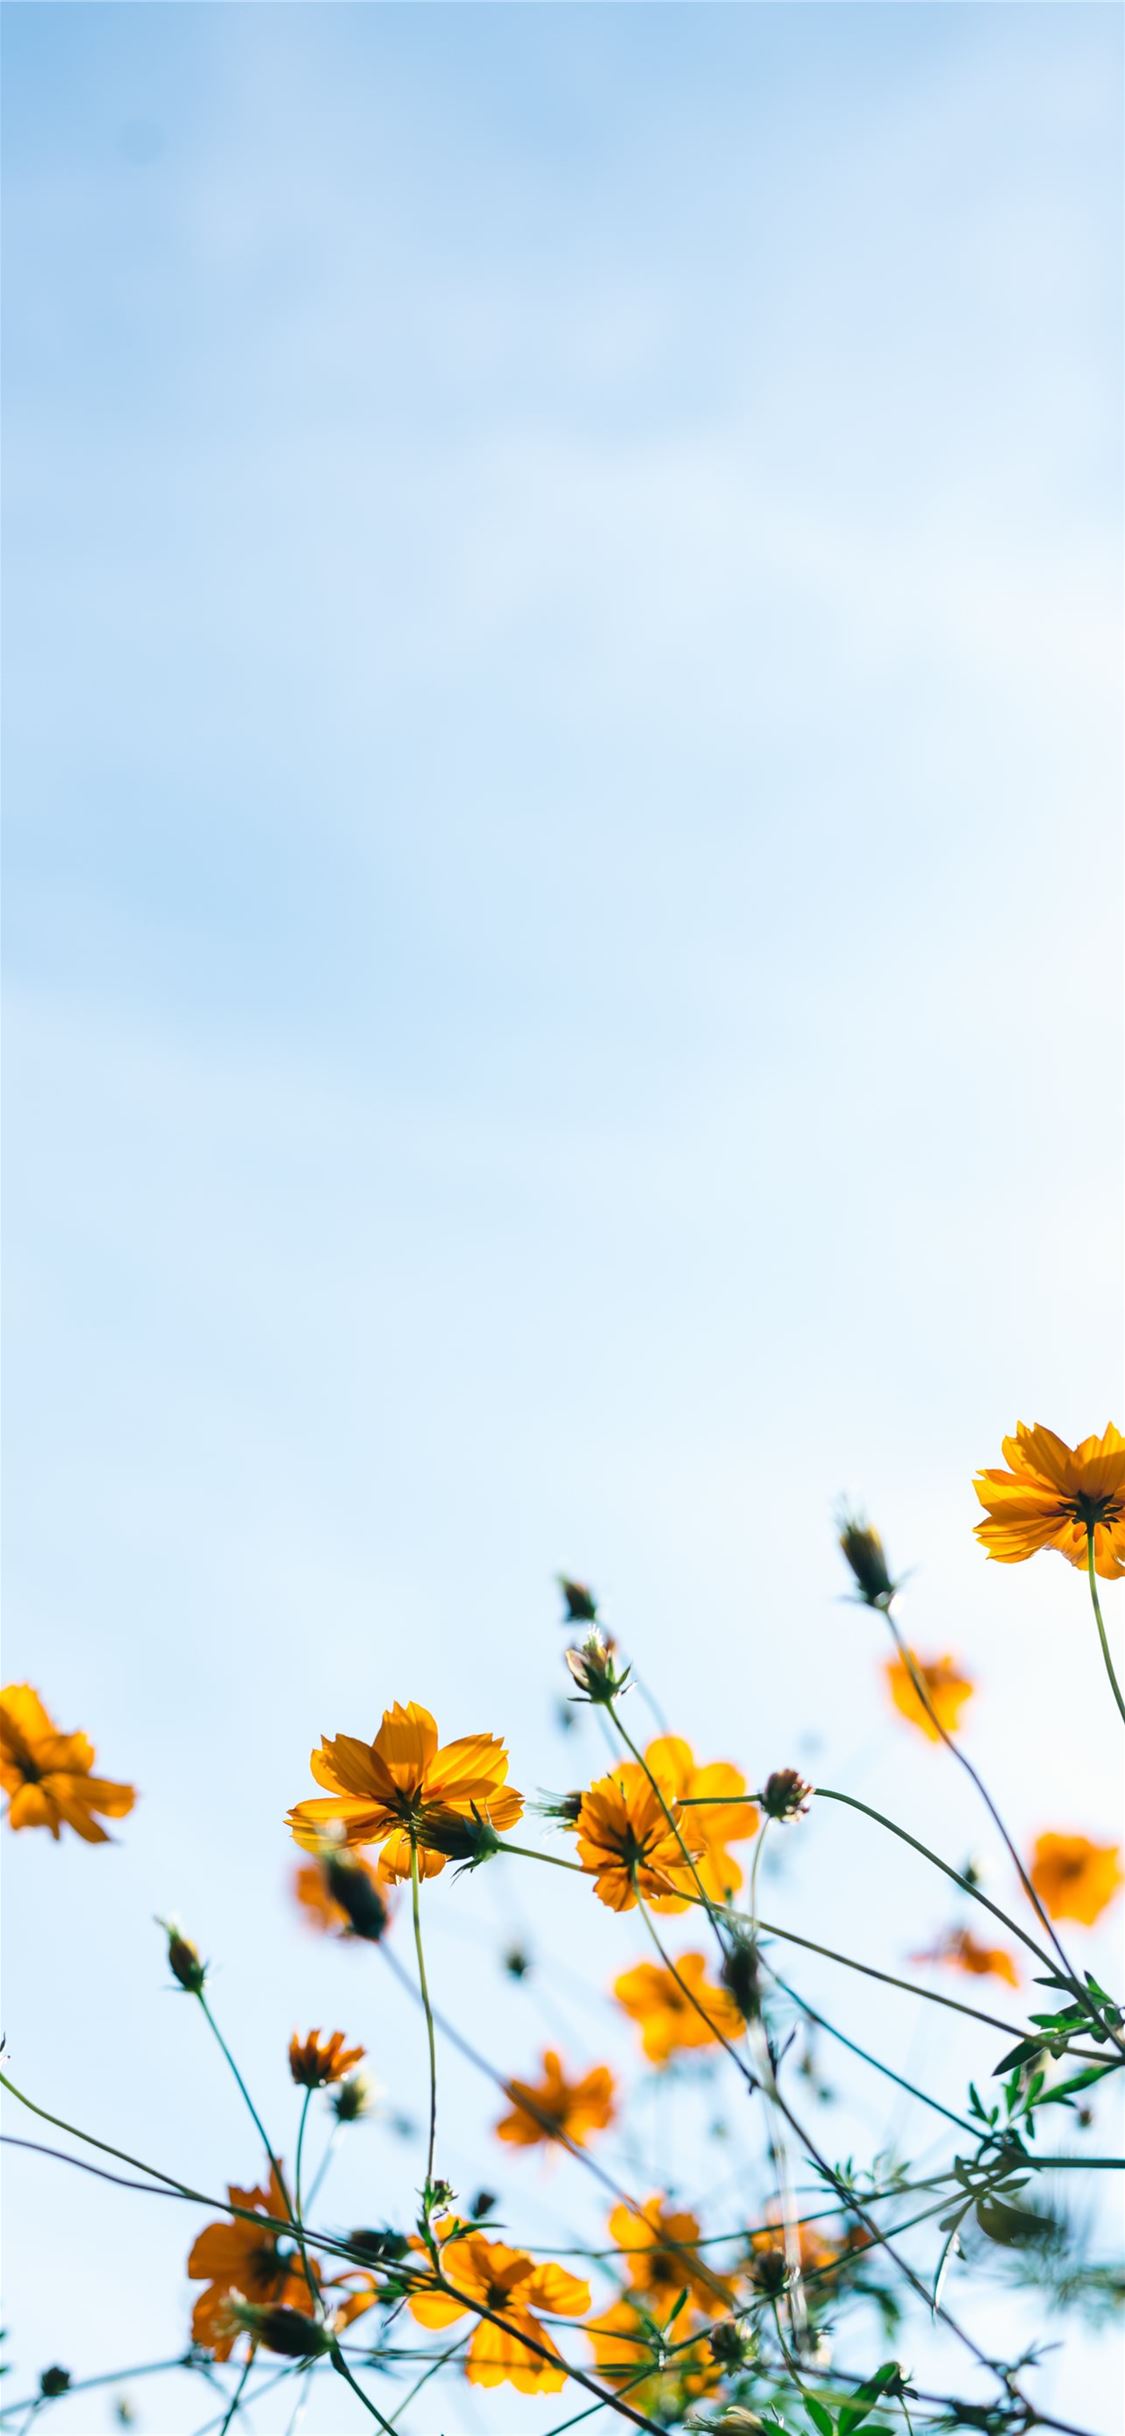 Blue And Yellow Flower Wallpapers